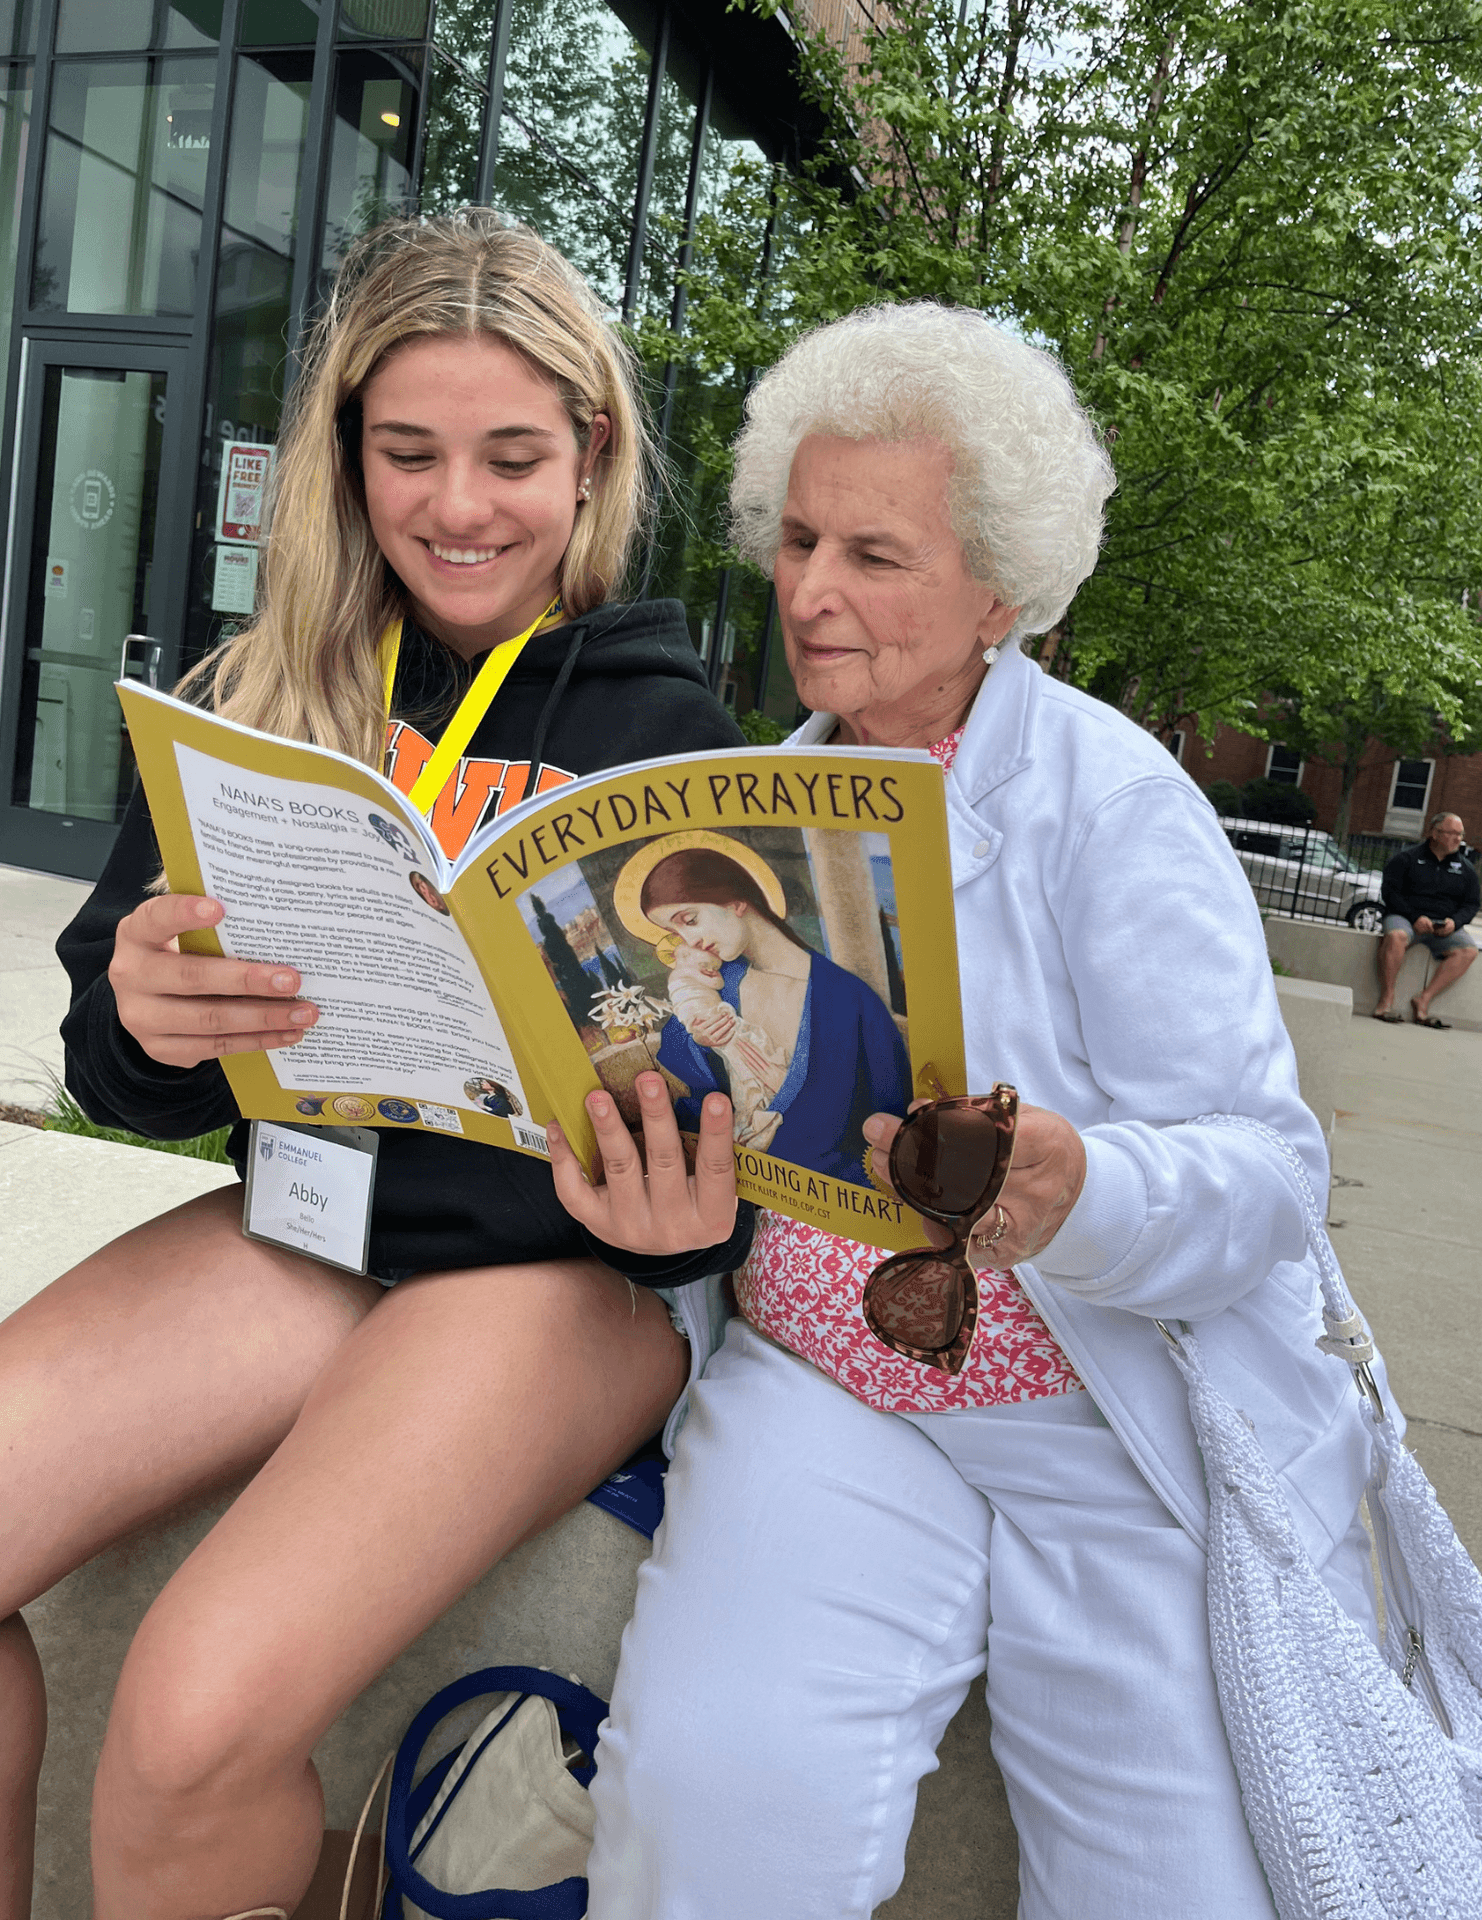 An older woman with dementia reading NANA’S BOOKS with her granddaughter on Emmanuel College’s campus. NANA’S BOOKS are for people living with dementia.